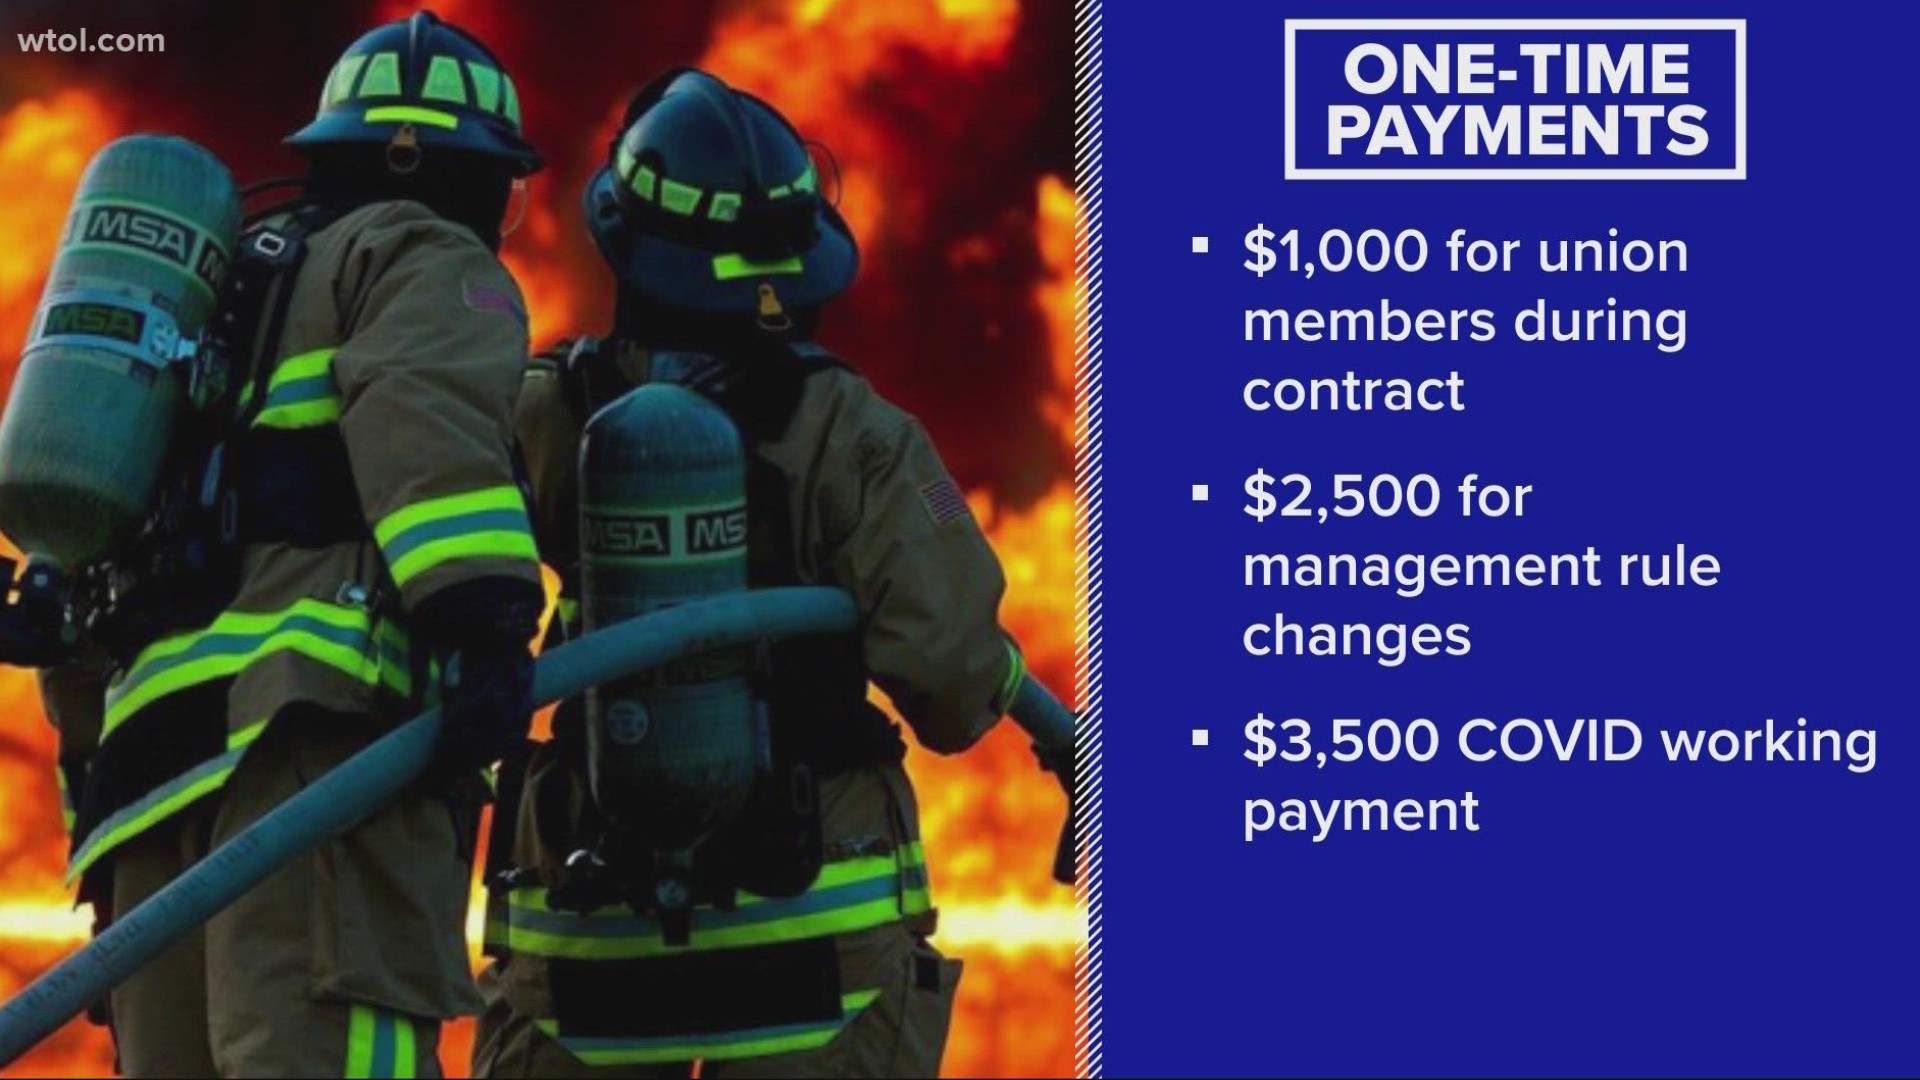 On Tuesday, Toledo City Council will be voting on a new contract with Toledo Firefighters Local 92, including a one-time payment for working during COVID-19.